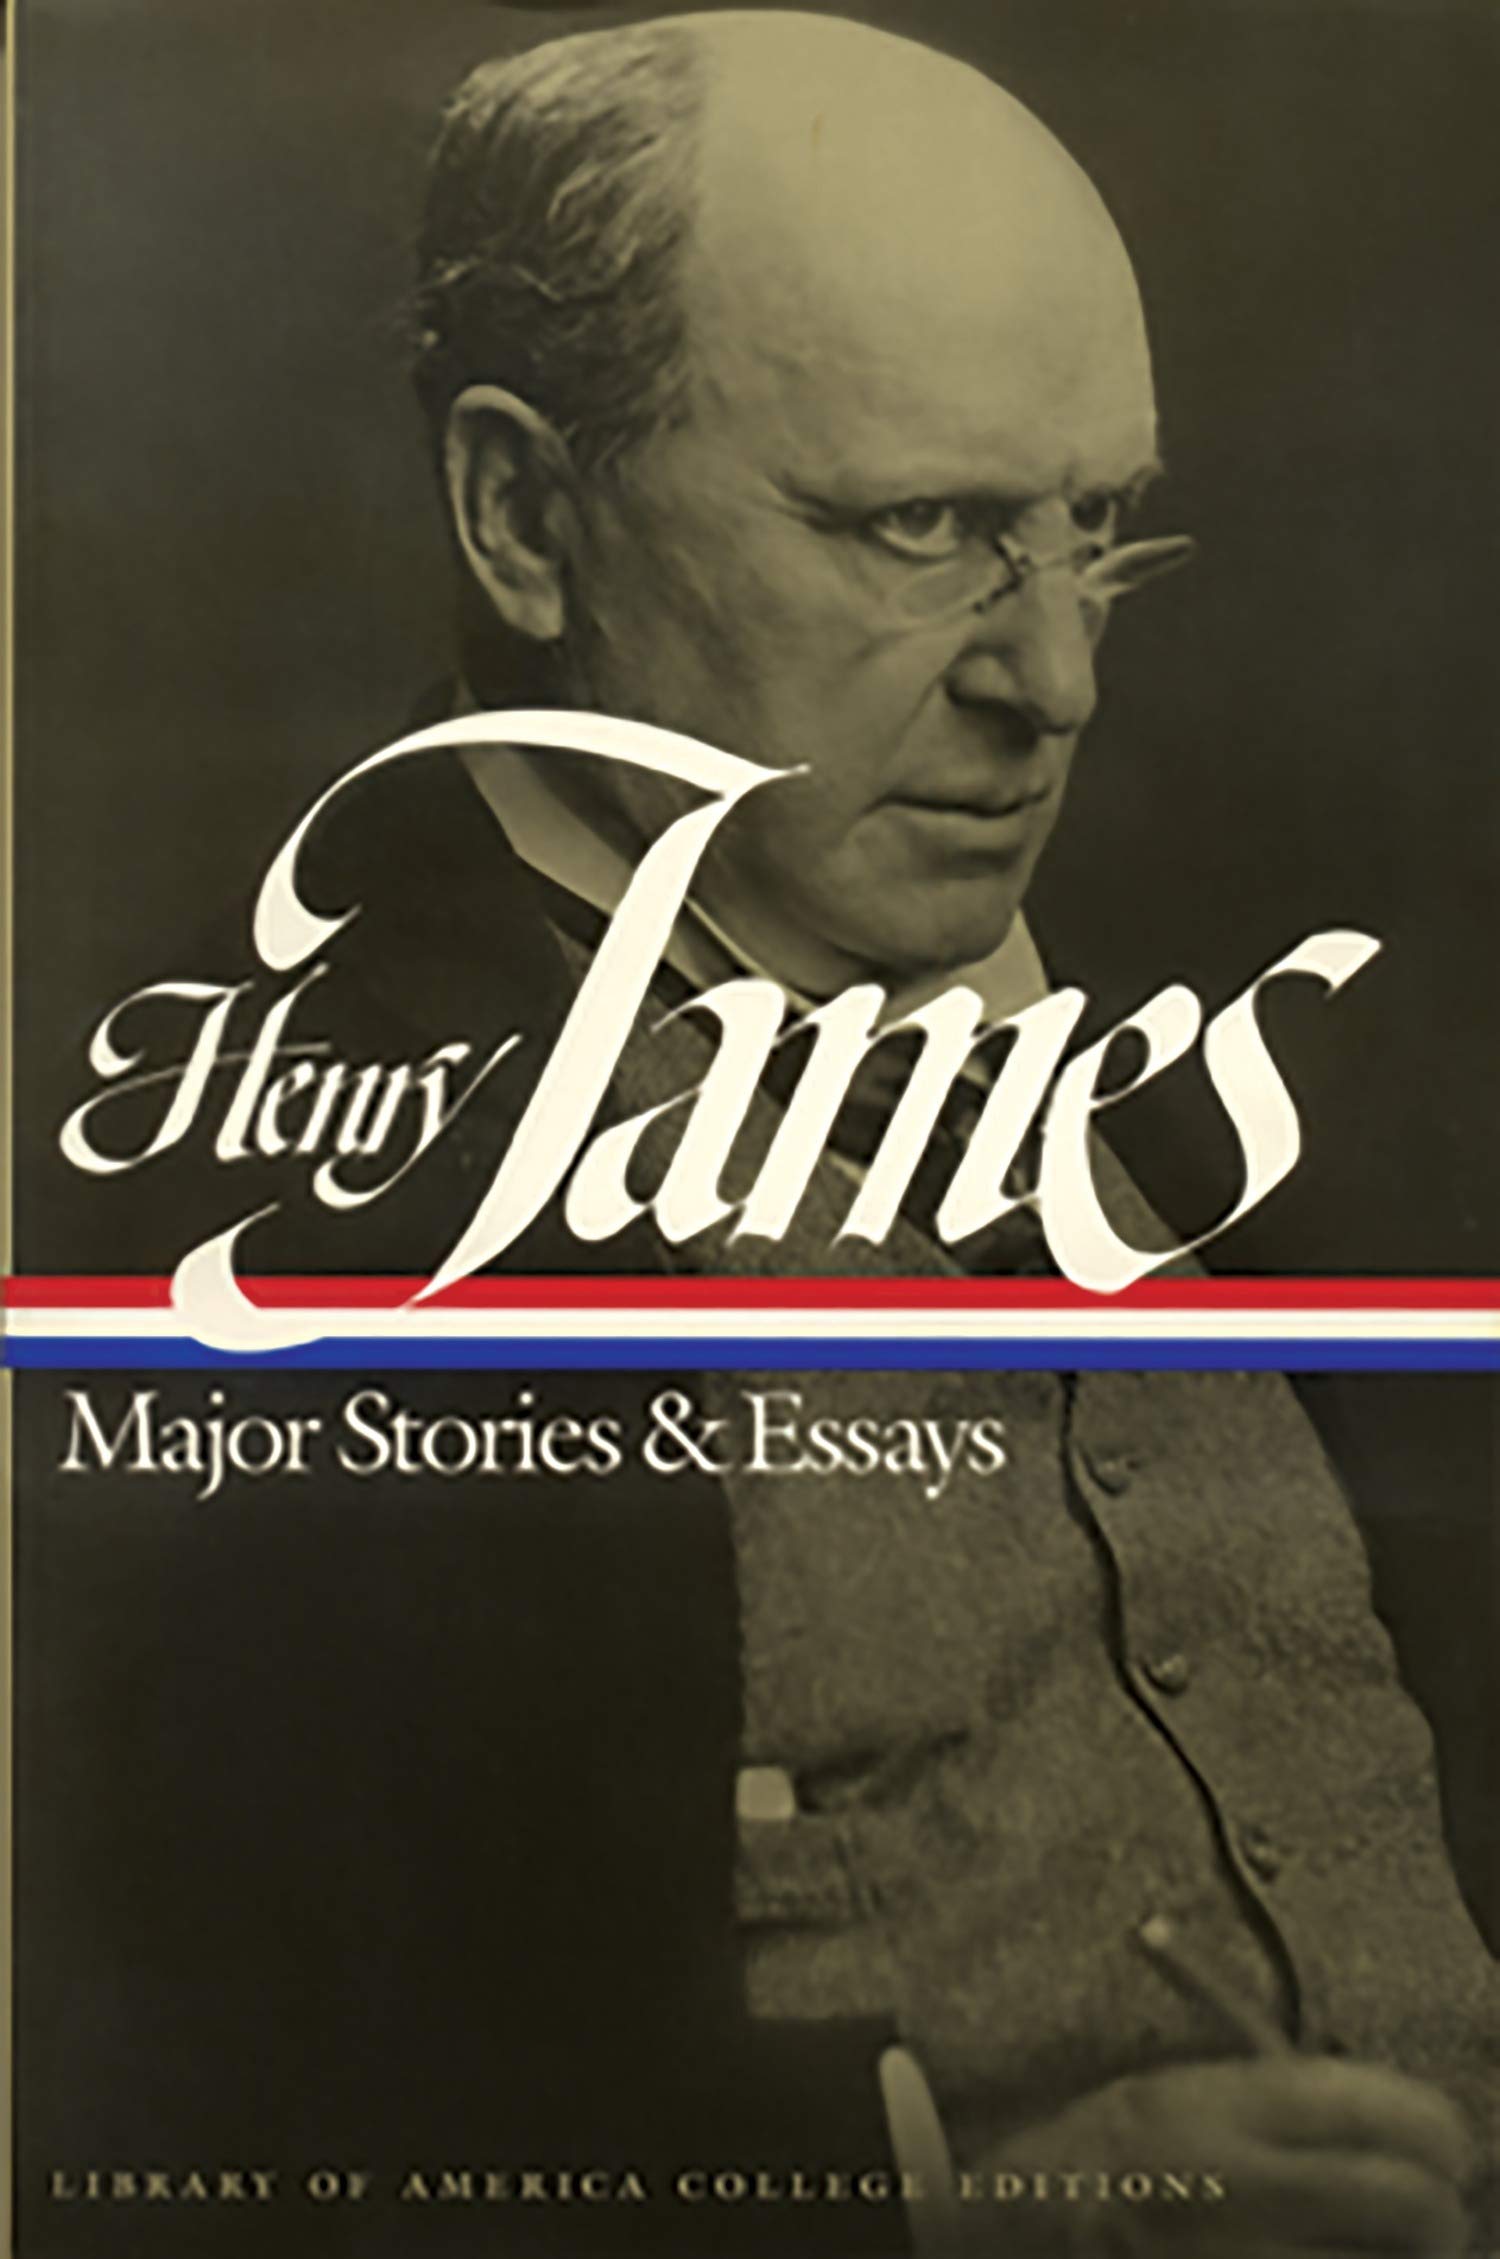 Henry James: Major Stories and Essays